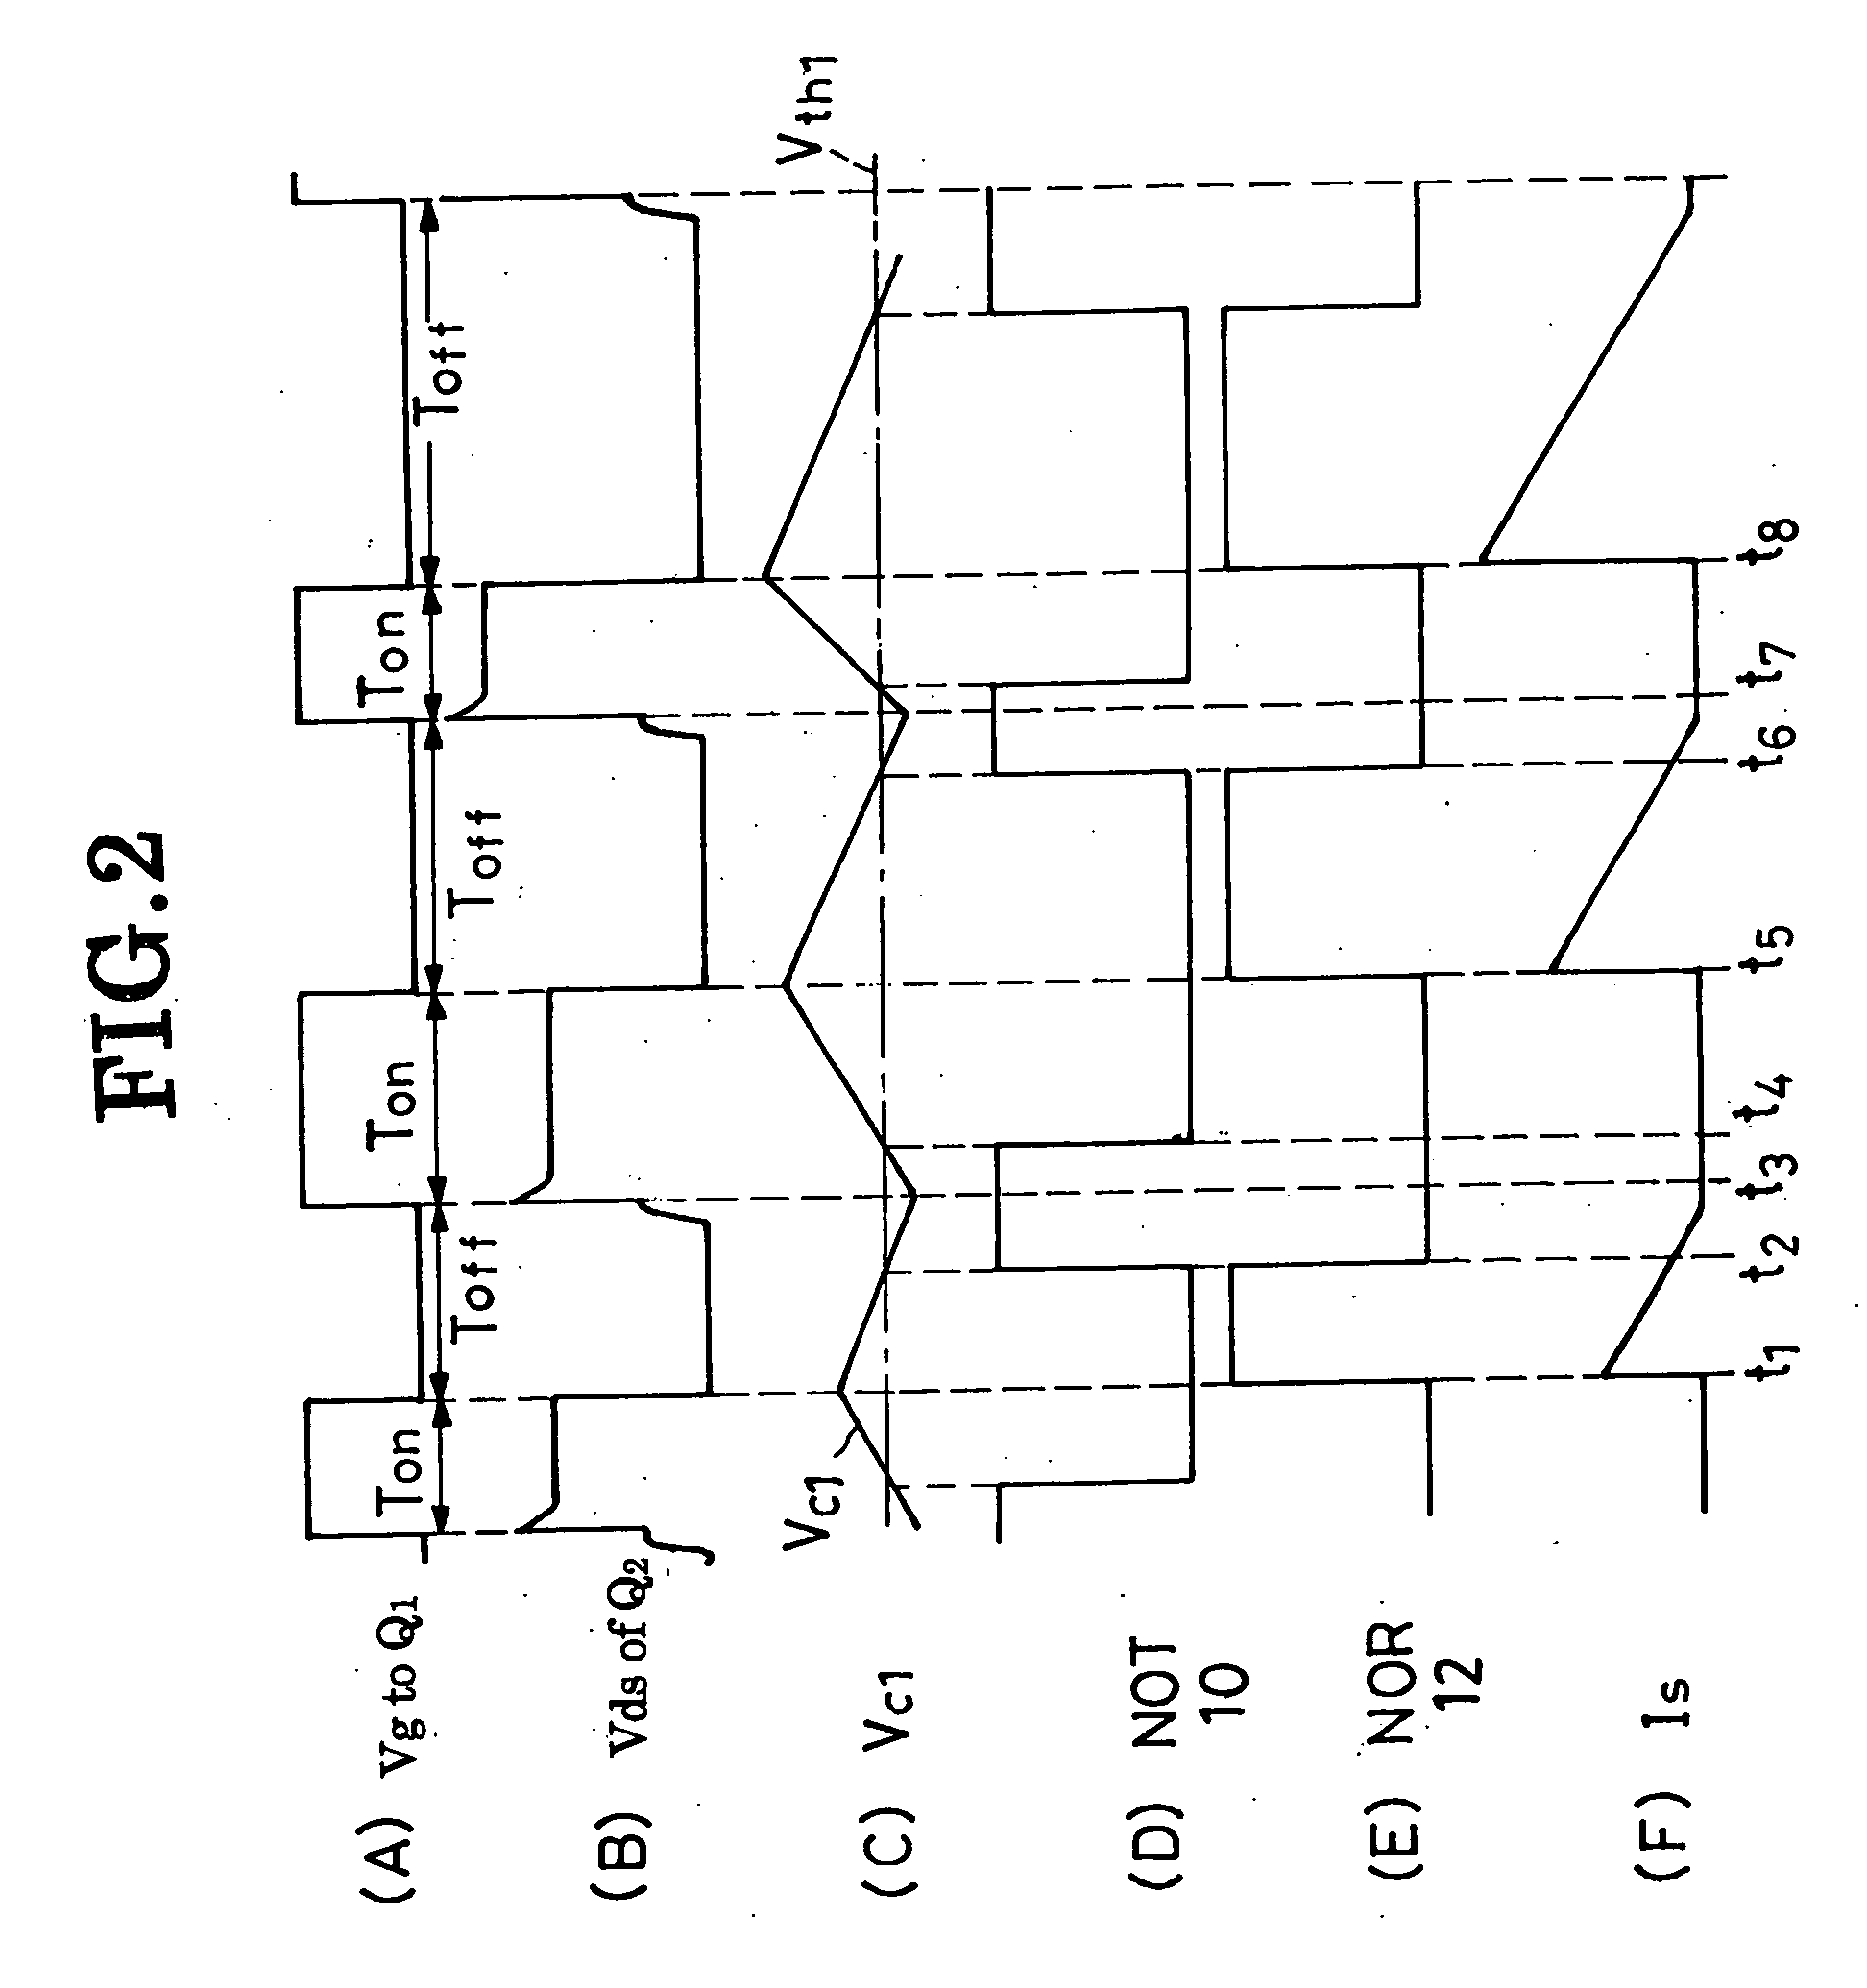 Switching-mode power supply having a synchronous rectifier